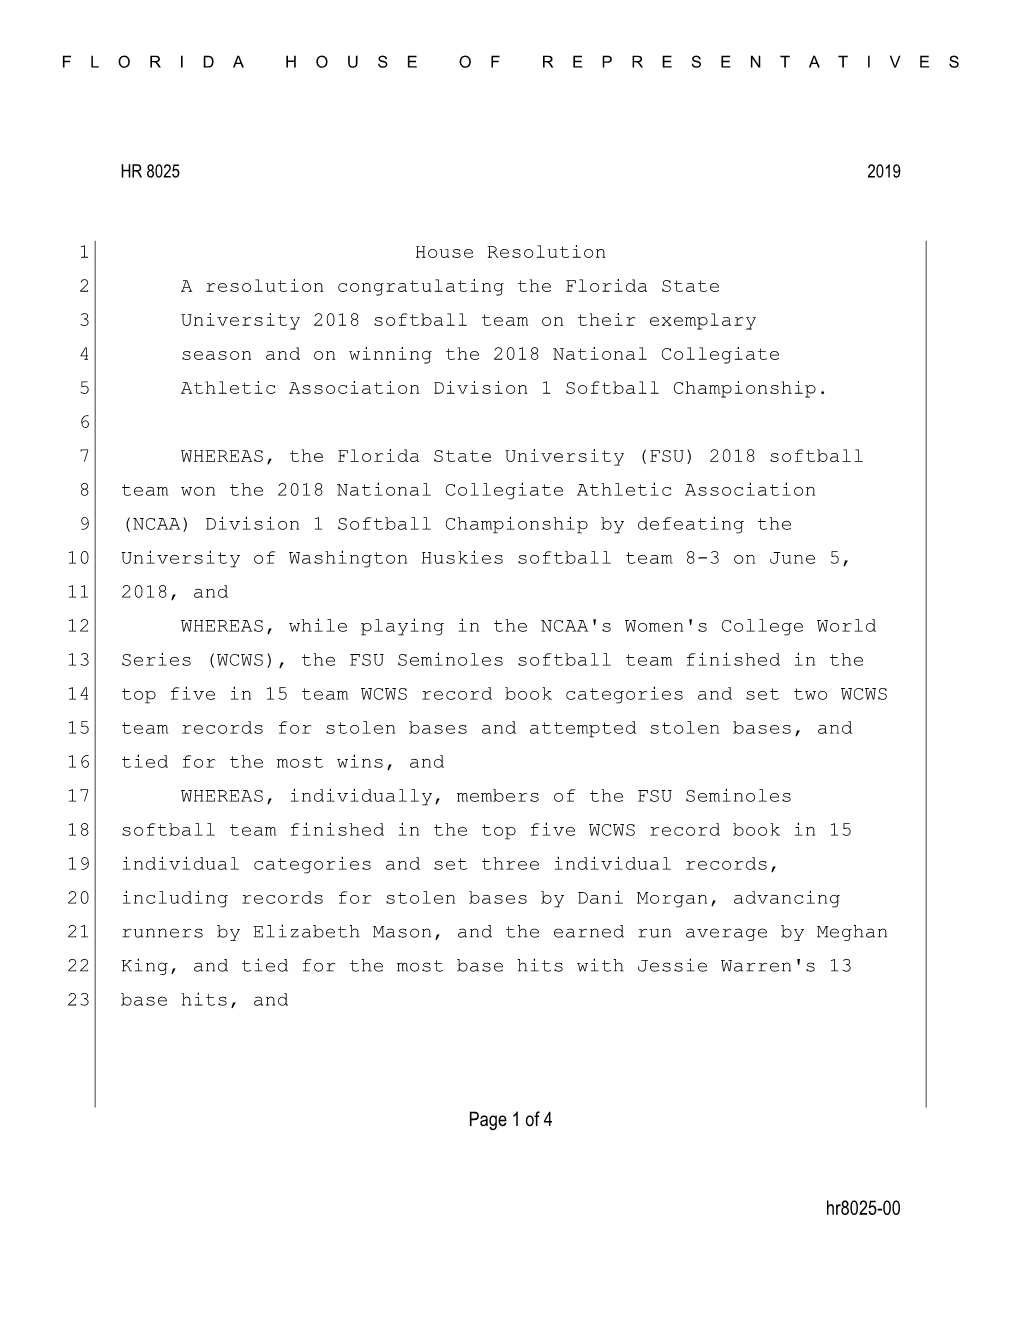 Hr8025-00 Page 1 of 4 House Resolution 1 A